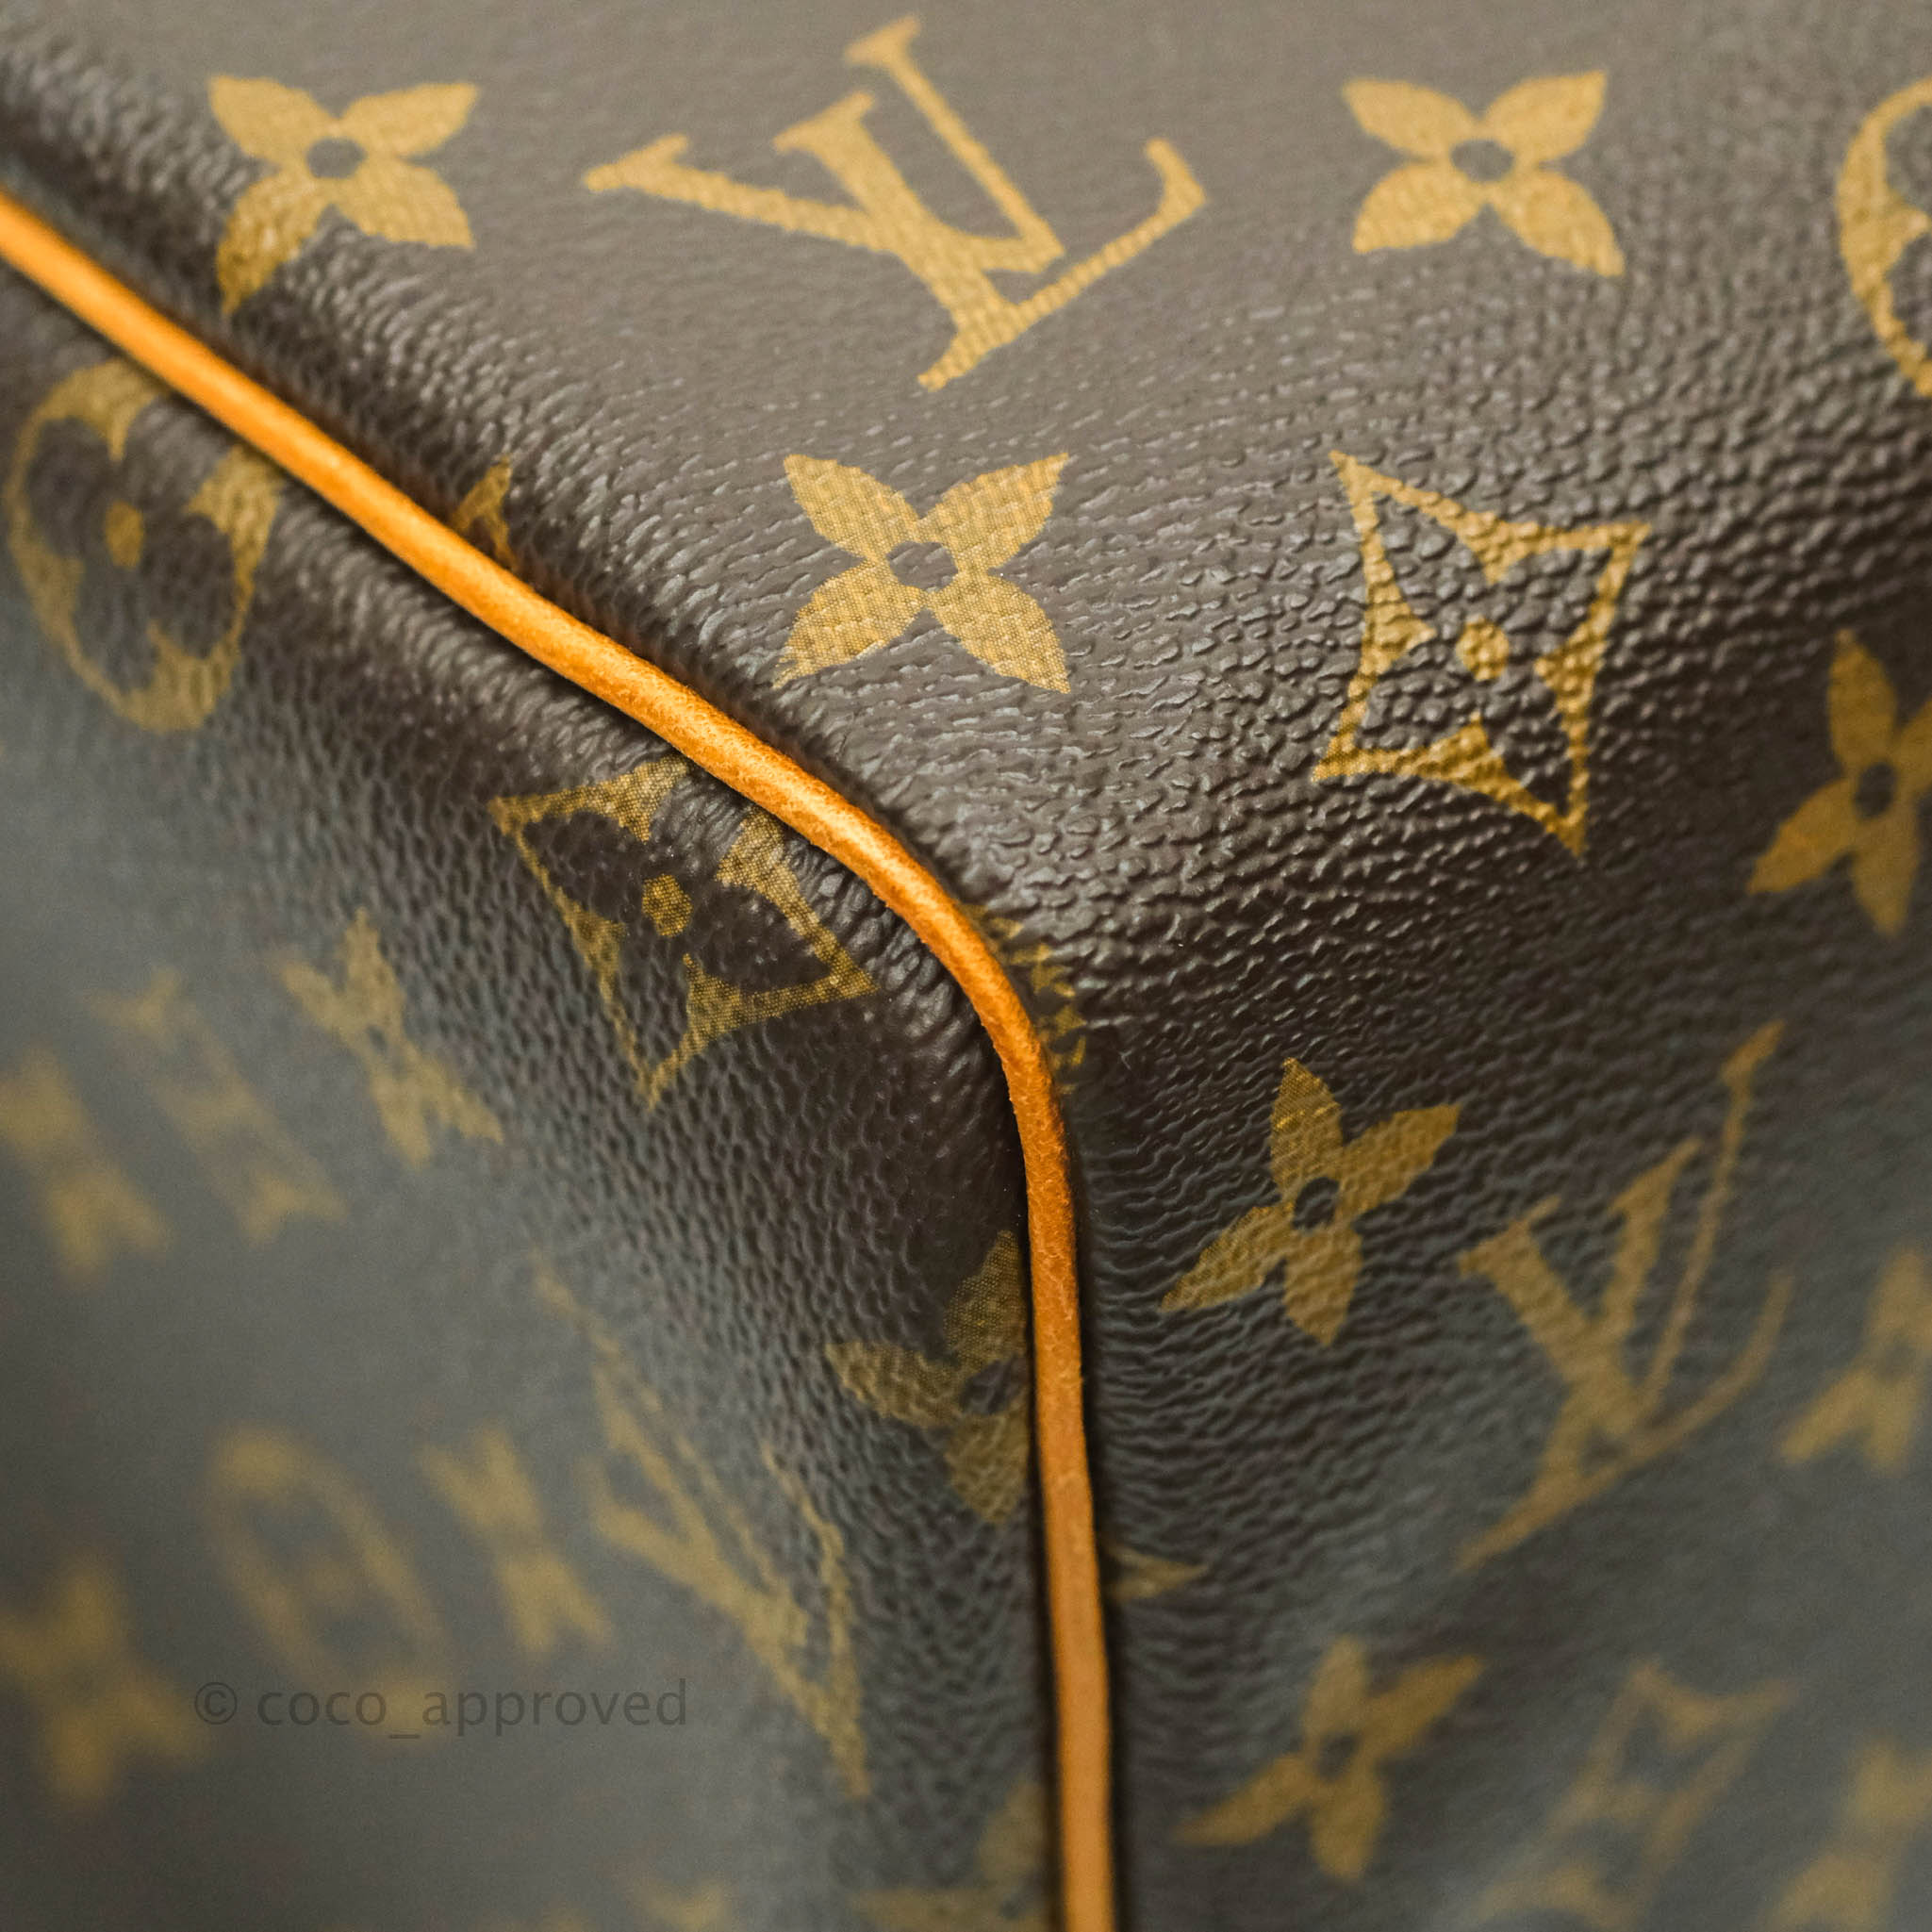 Louis Vuitton Giant Monogram Canvas By The Pool Victorine Wallet